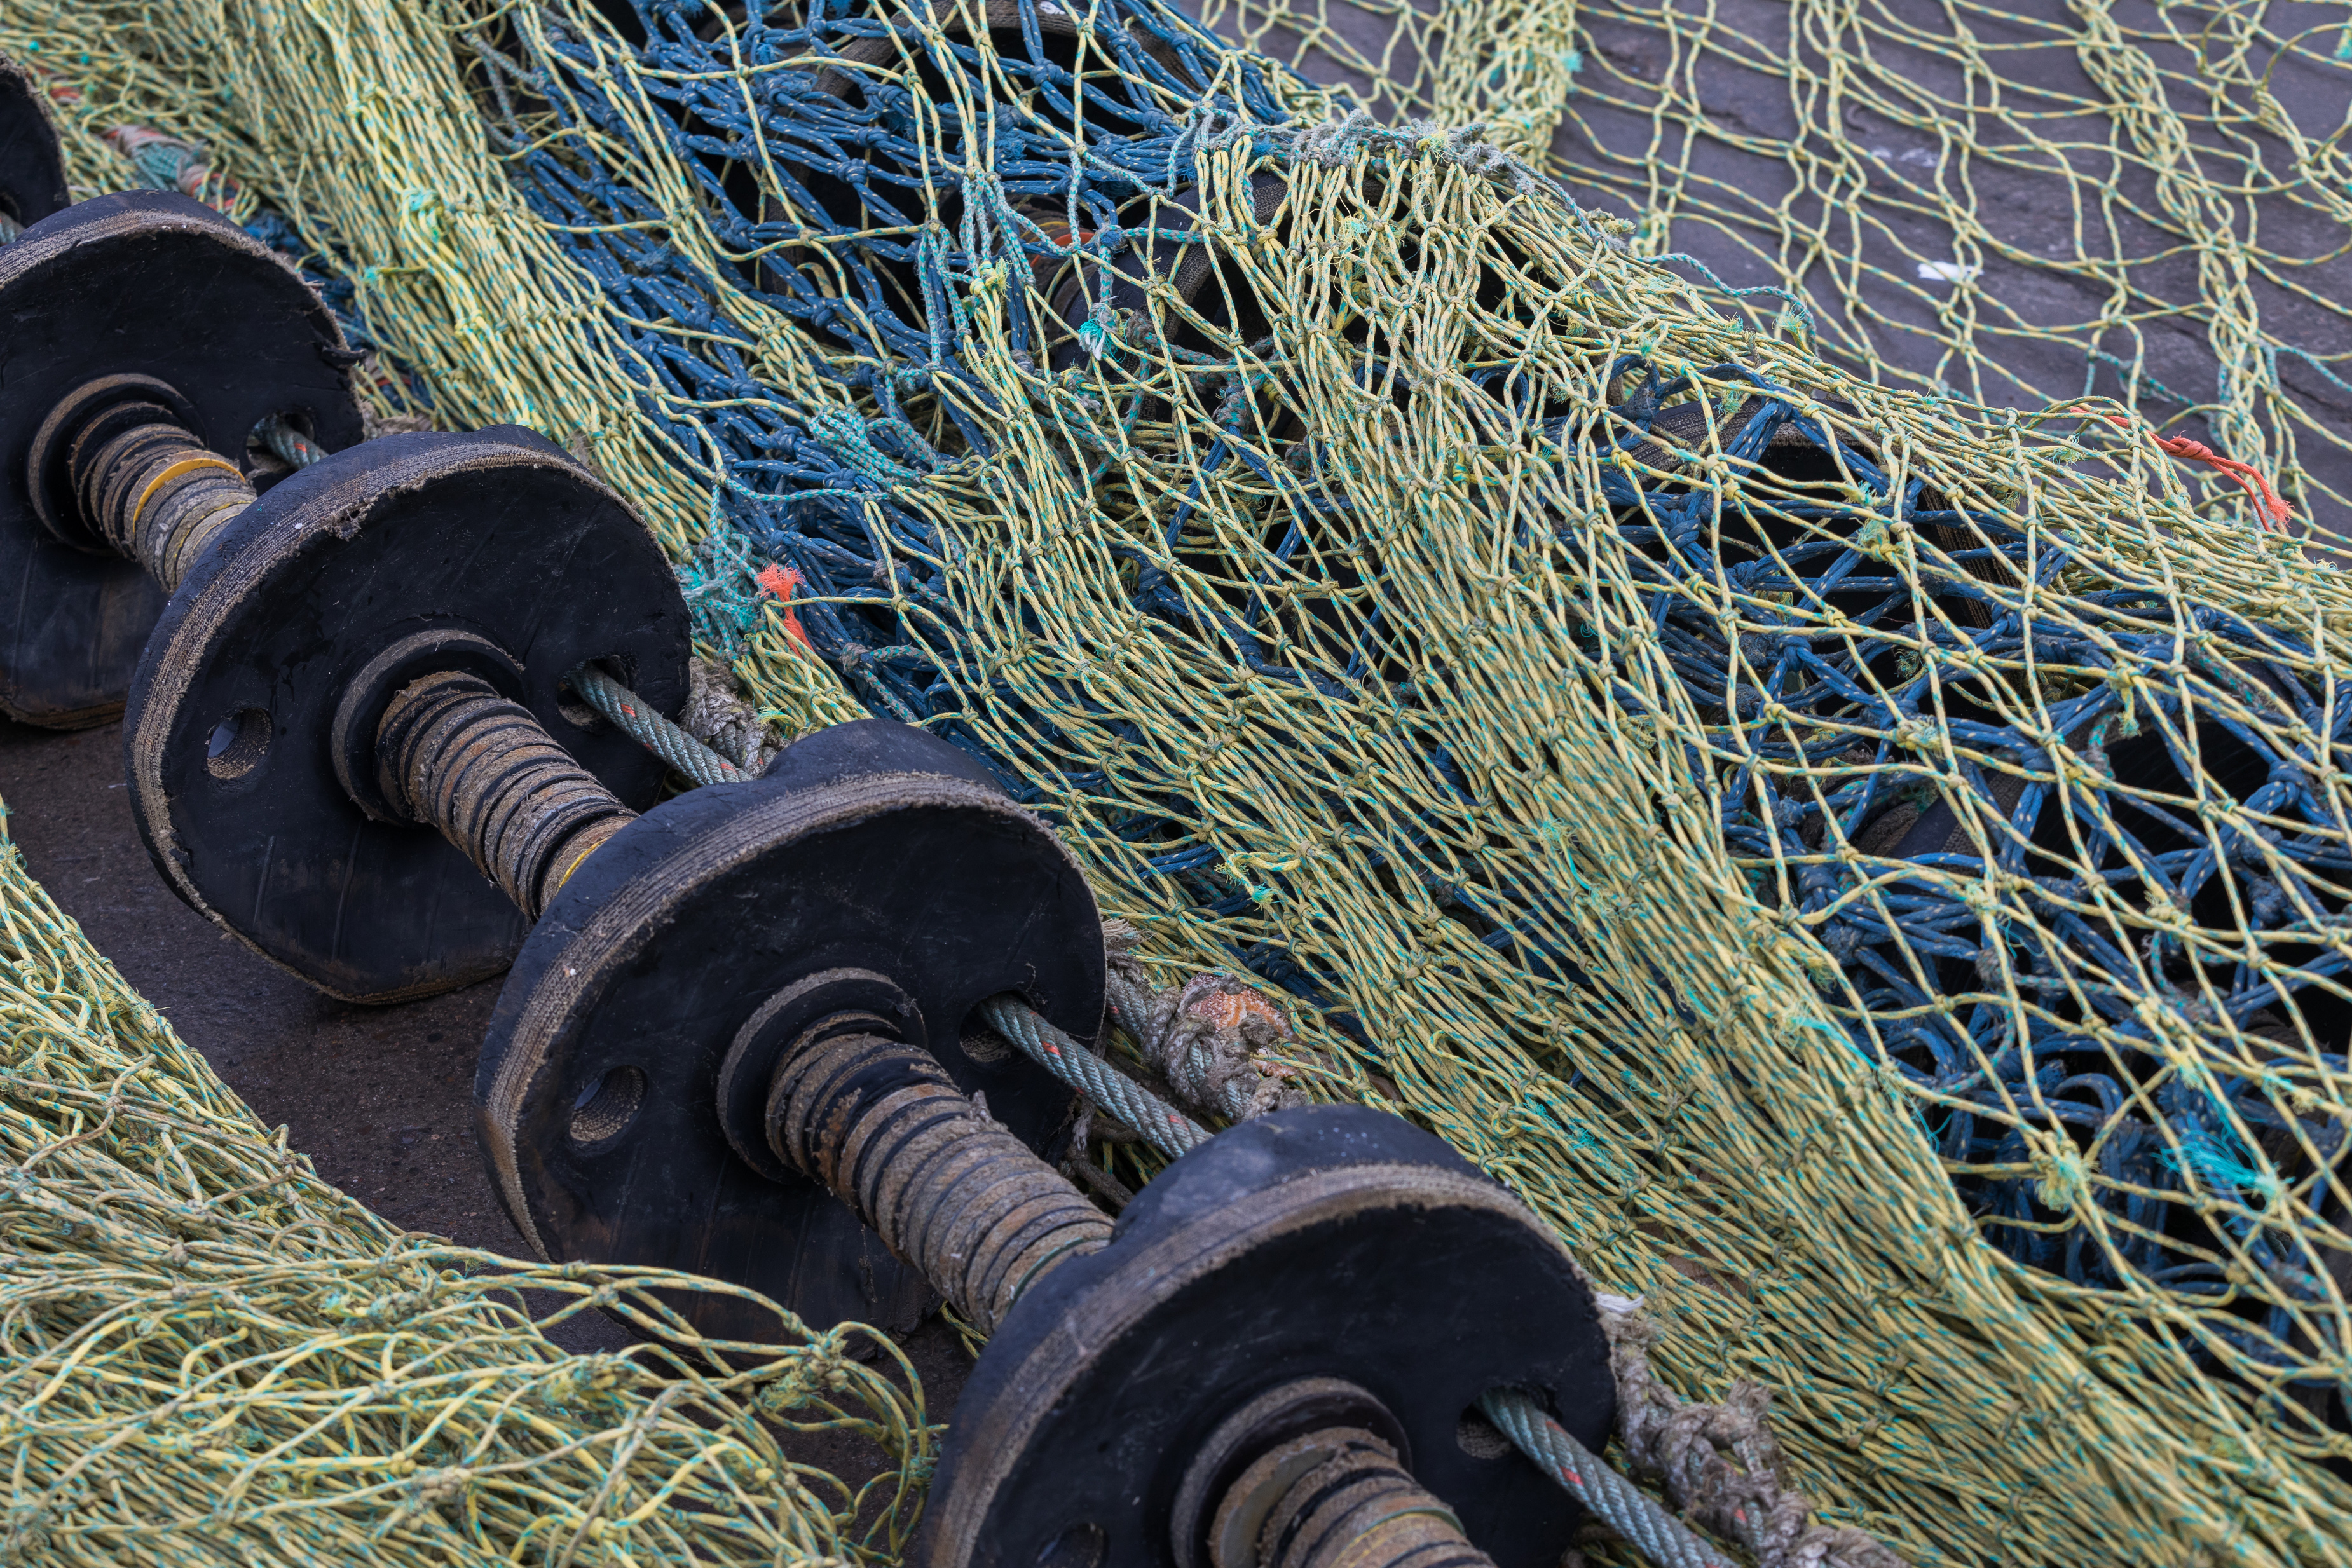 Fishing gear laid out on pier